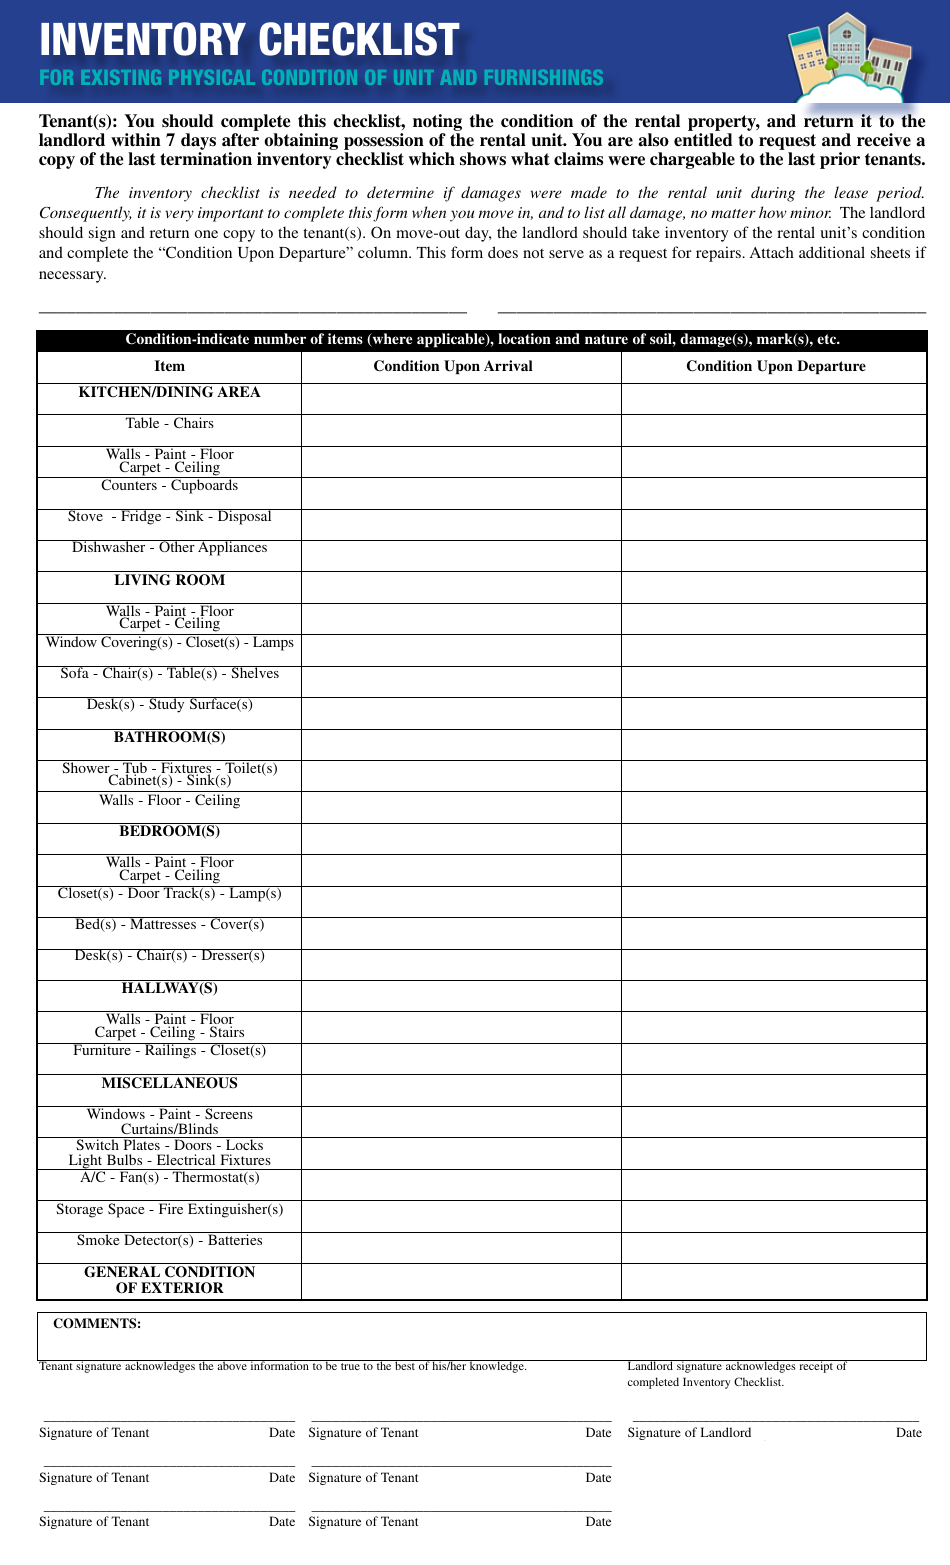 Inventory checklist template for existing physical condition of unit and furnishings